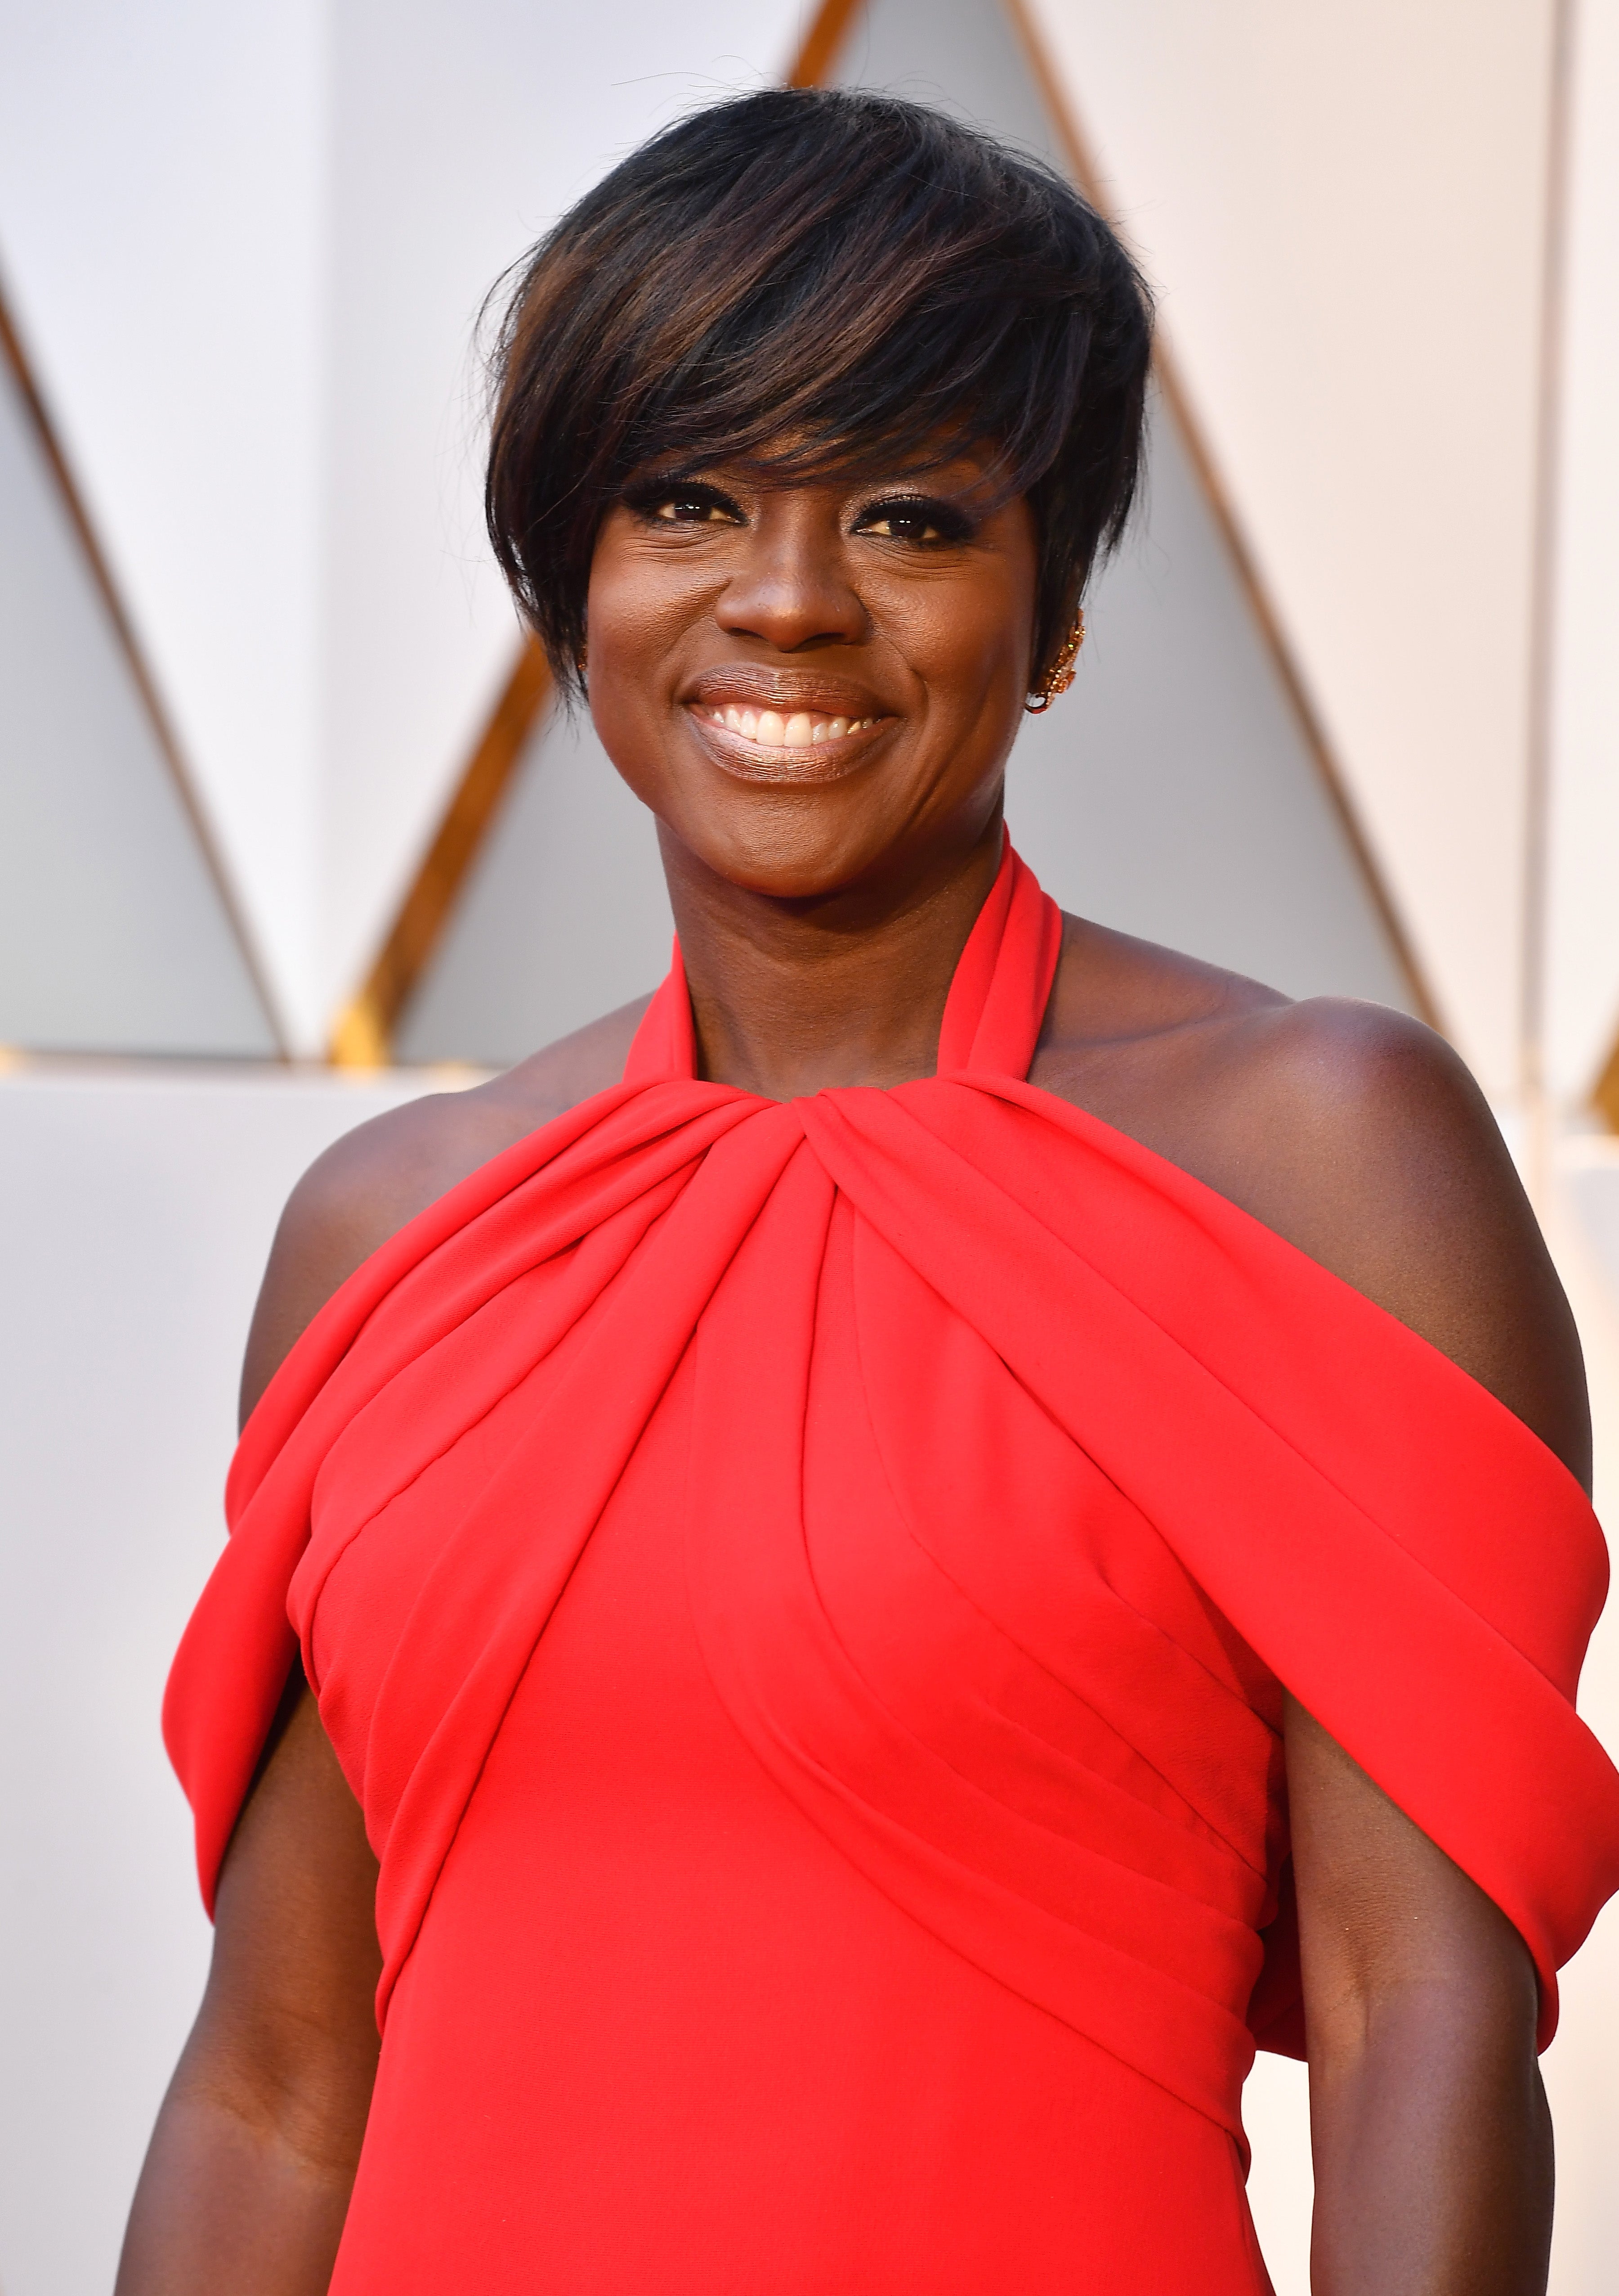 Viola Davis Debuts A Cropped Do On The 2017 Oscars Red Carpet